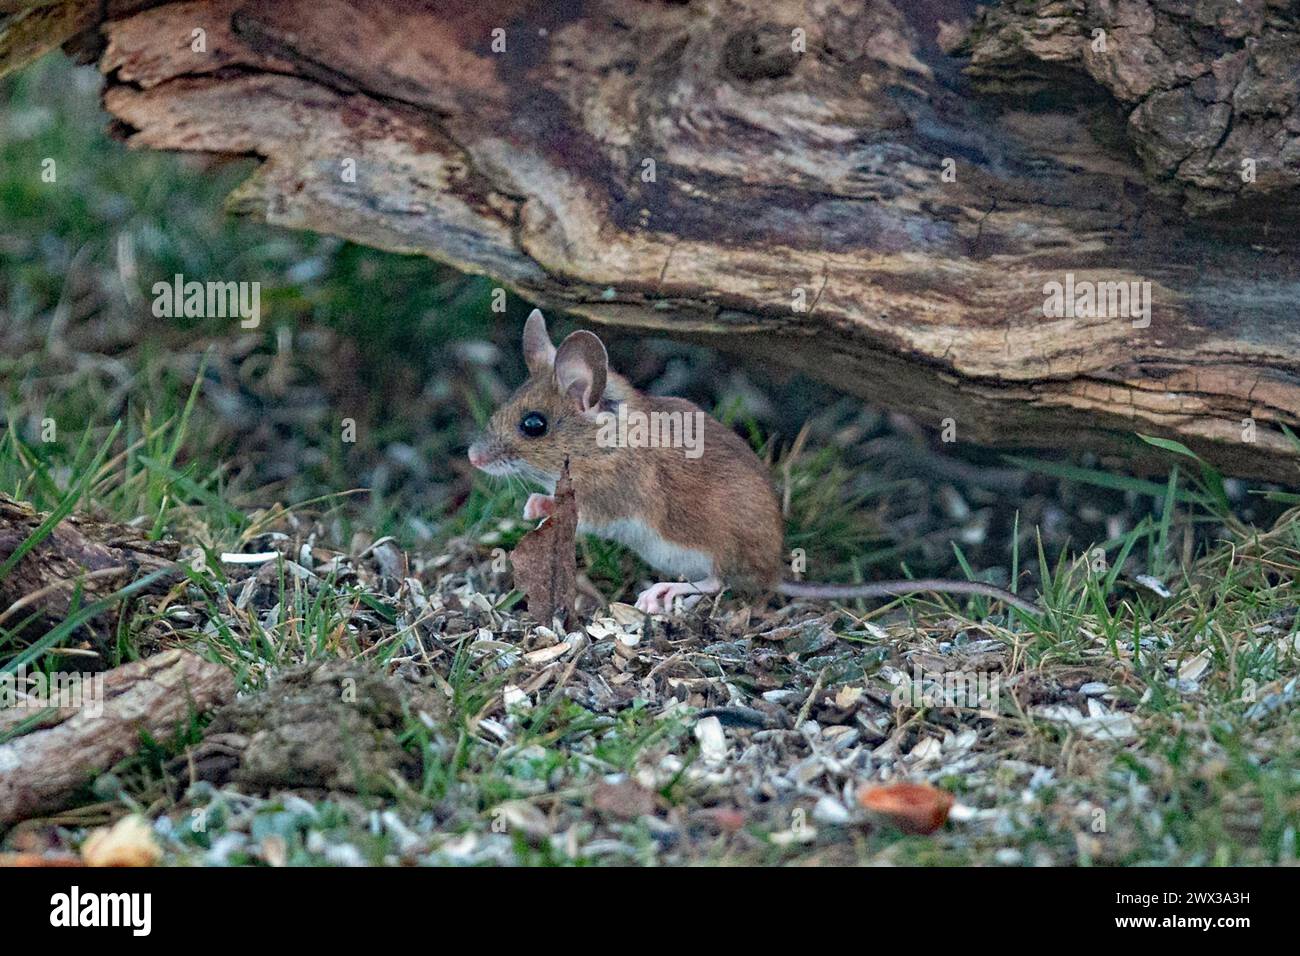 Wood mouse standing in green grass in front of tree trunk, looking left Stock Photo